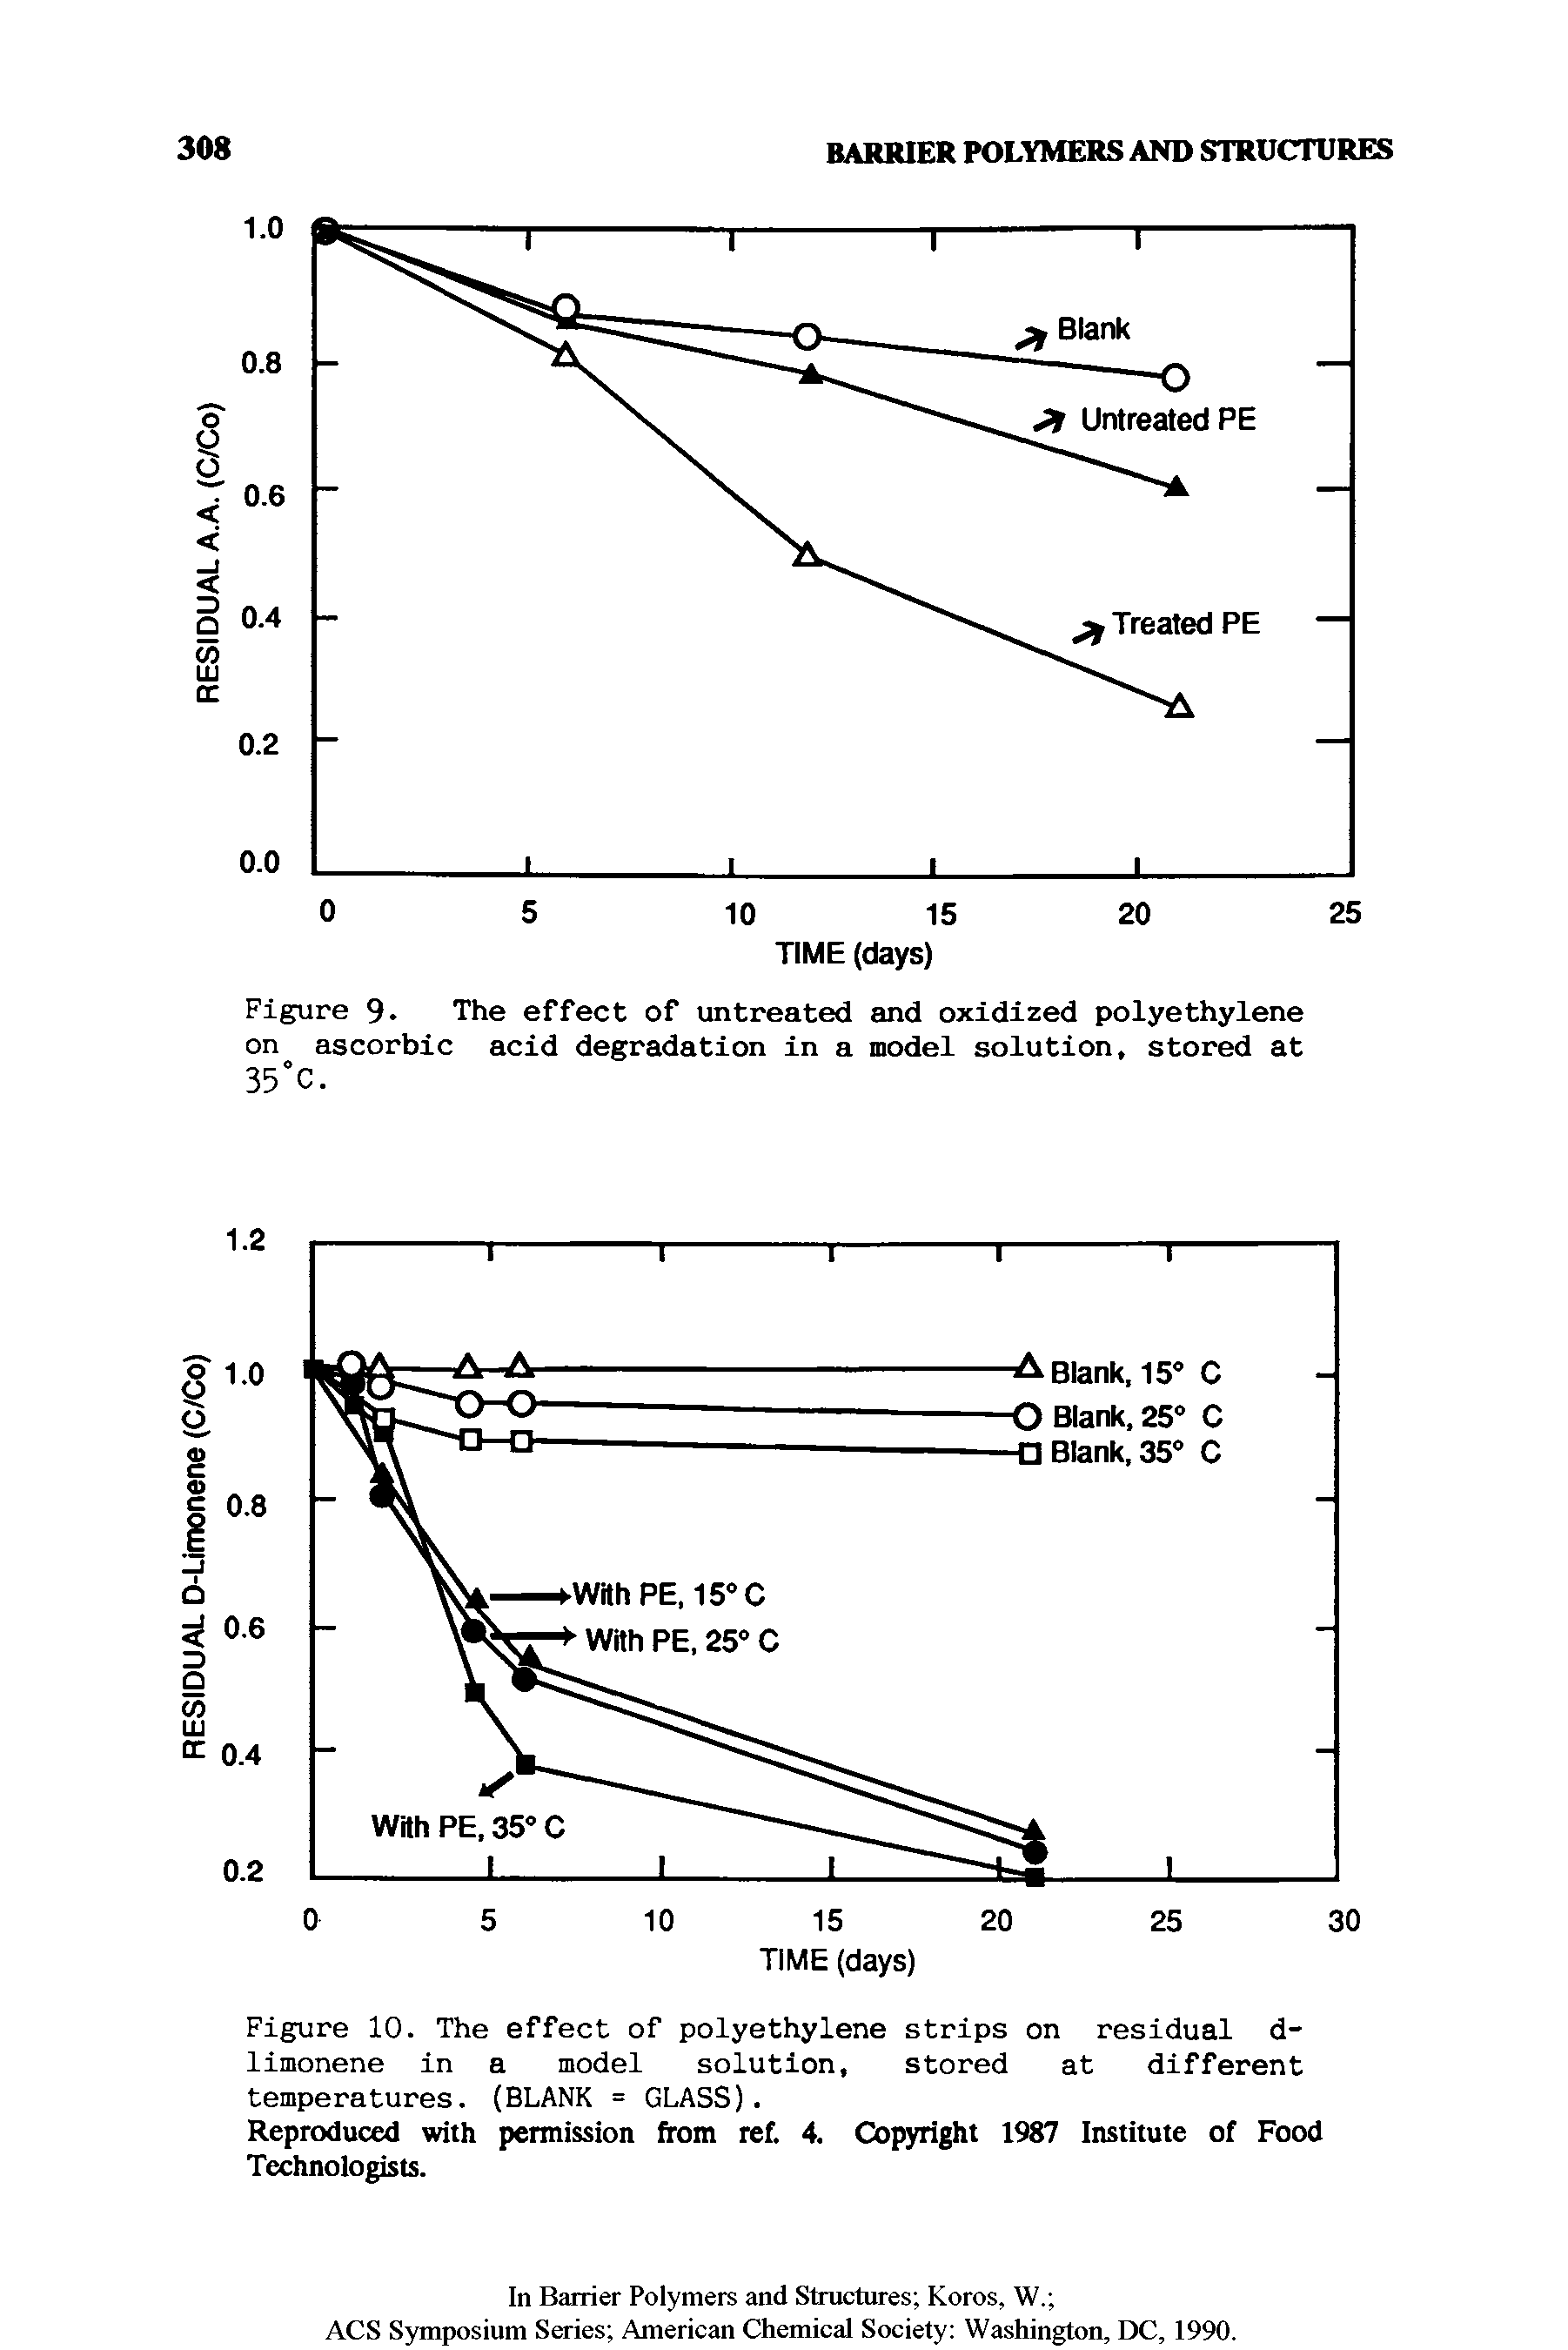 Figure 9. The effect of untreated and oxidized polyethylene on ascorbic acid degradation in a model solution, stored at 35°C.